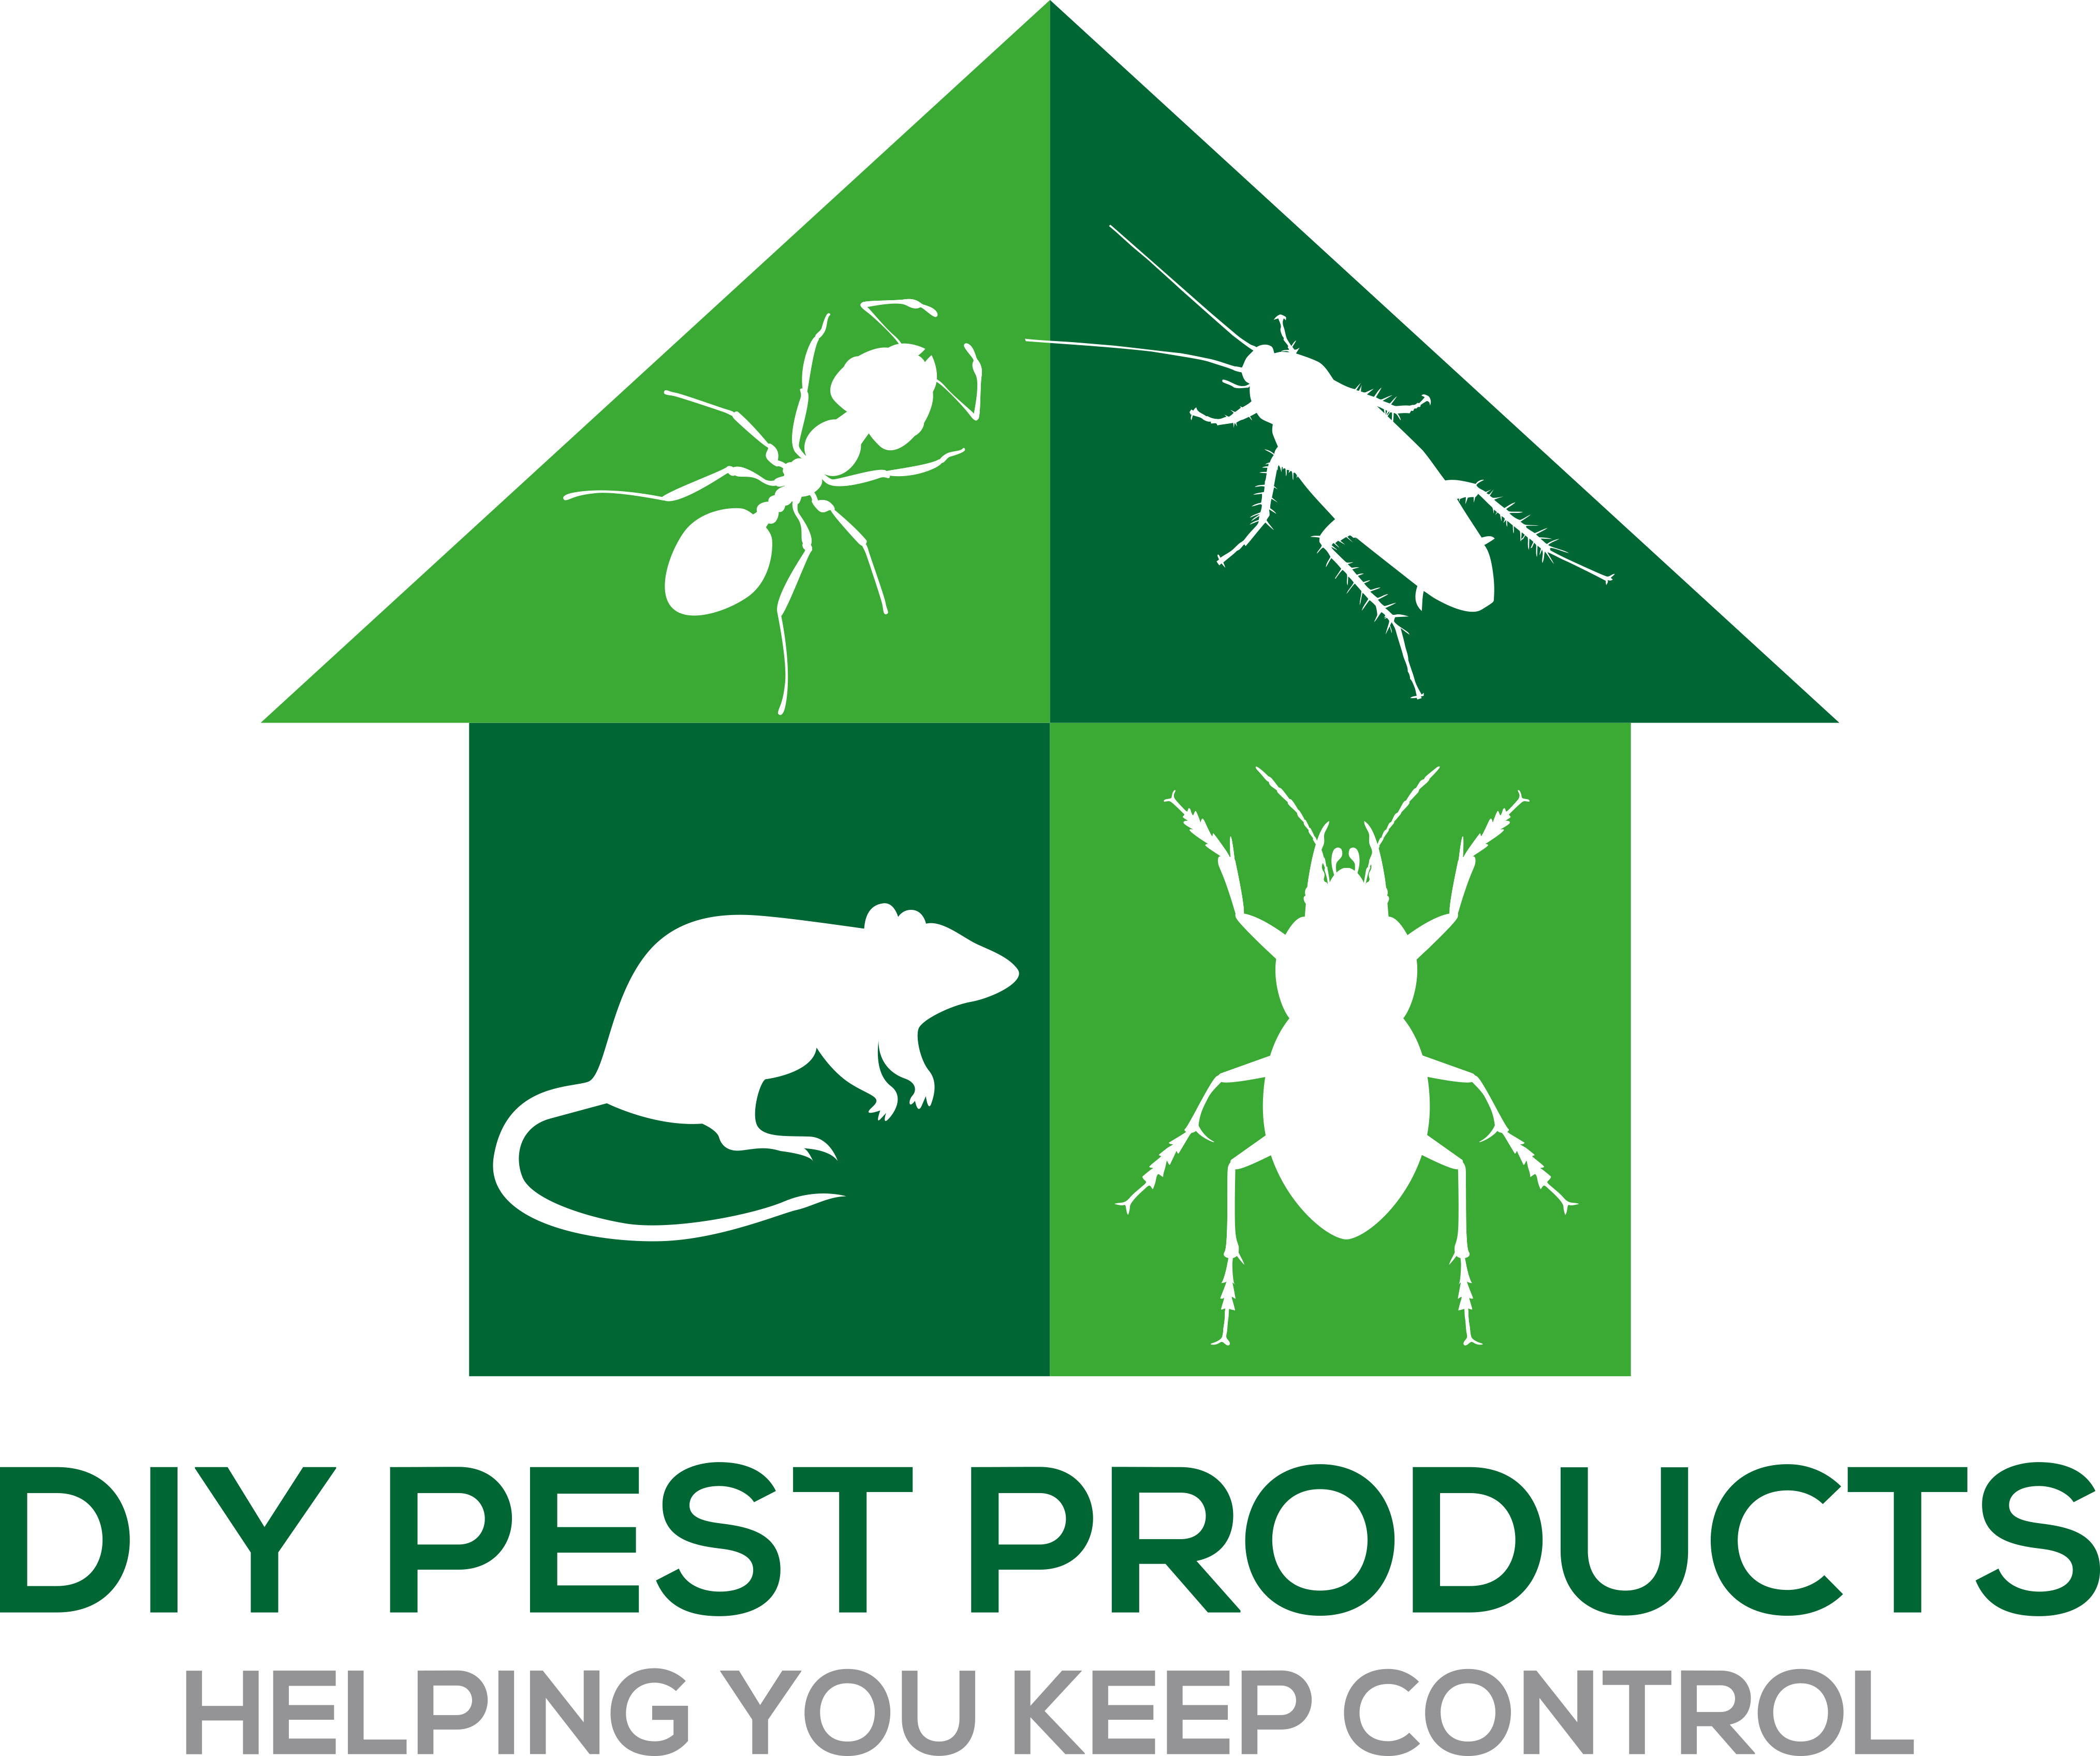 DIY Pest Products